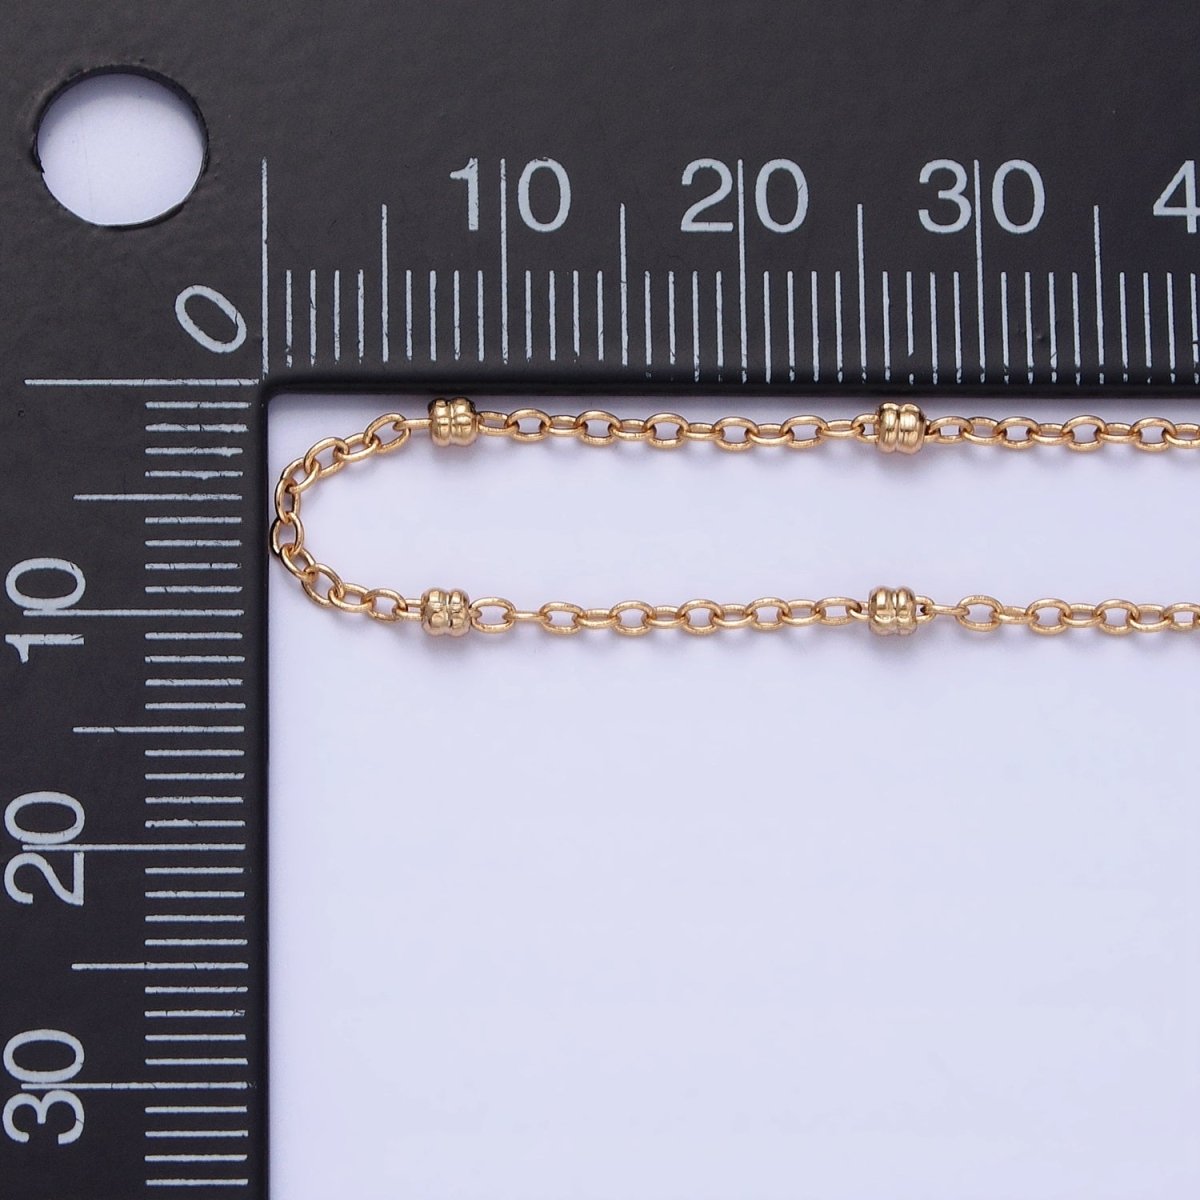 18K Gold Filled Dainty 1.2mm Satellite Chain Necklace 17.75 inch Long for Layer Necklace Component | WA-1684 Clearance Pricing - DLUXCA